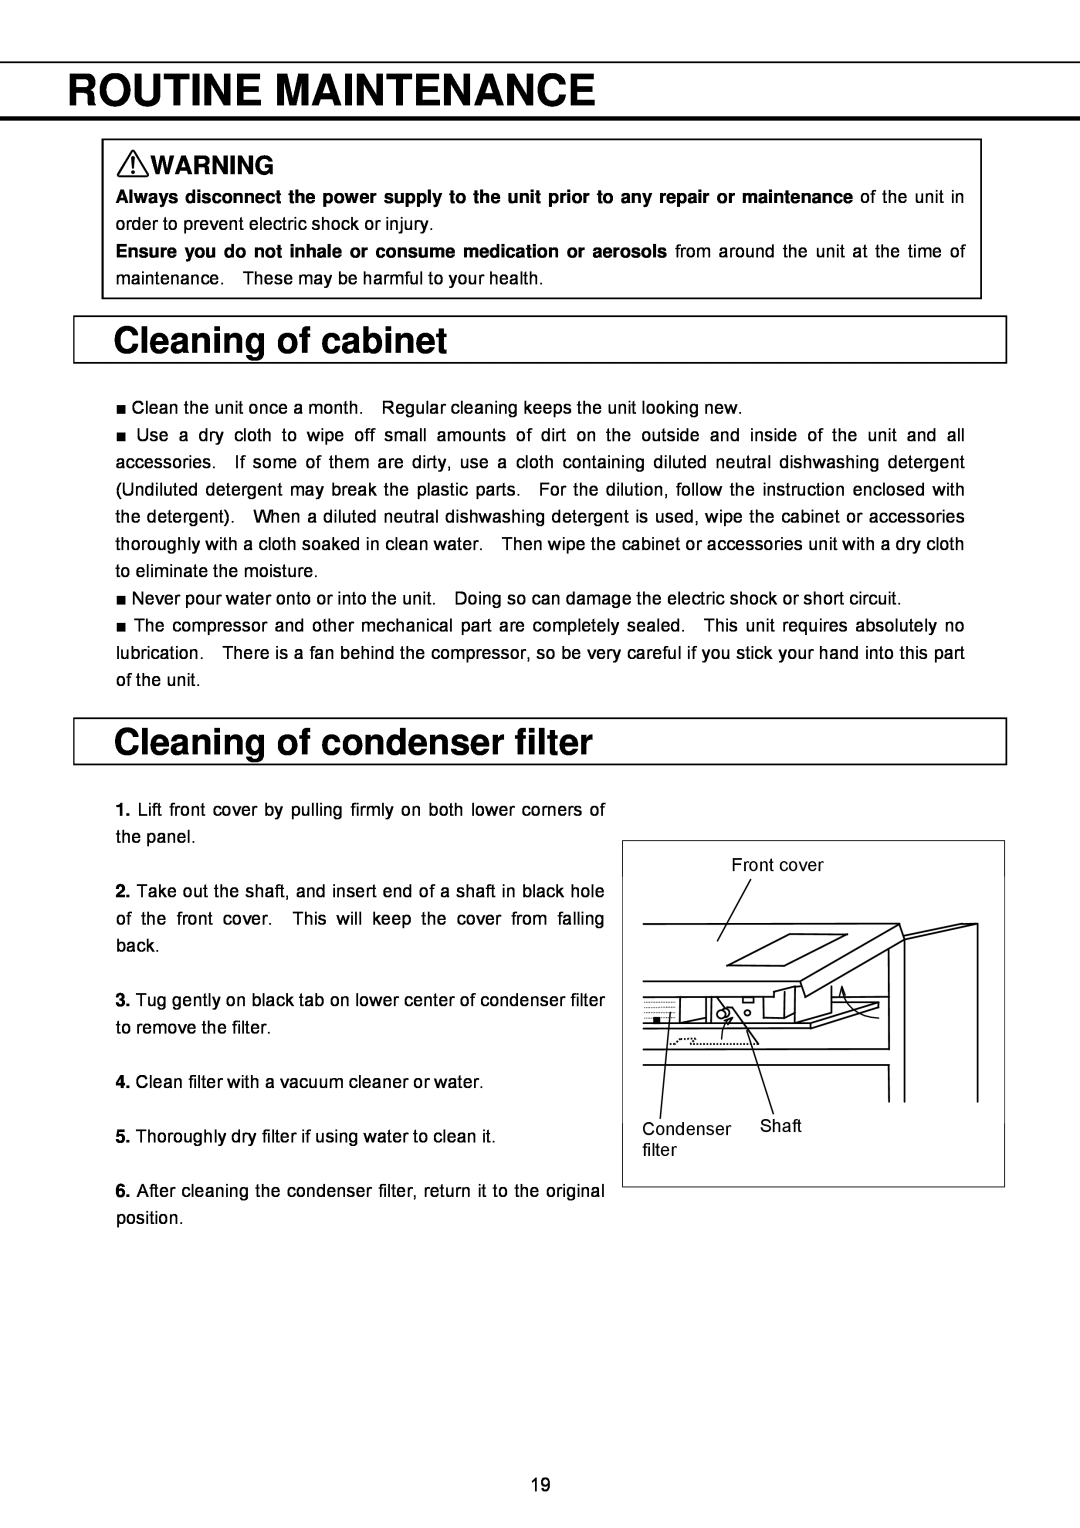 Sanyo MBR-1404GR instruction manual Routine Maintenance, Cleaning of cabinet, Cleaning of condenser filter 